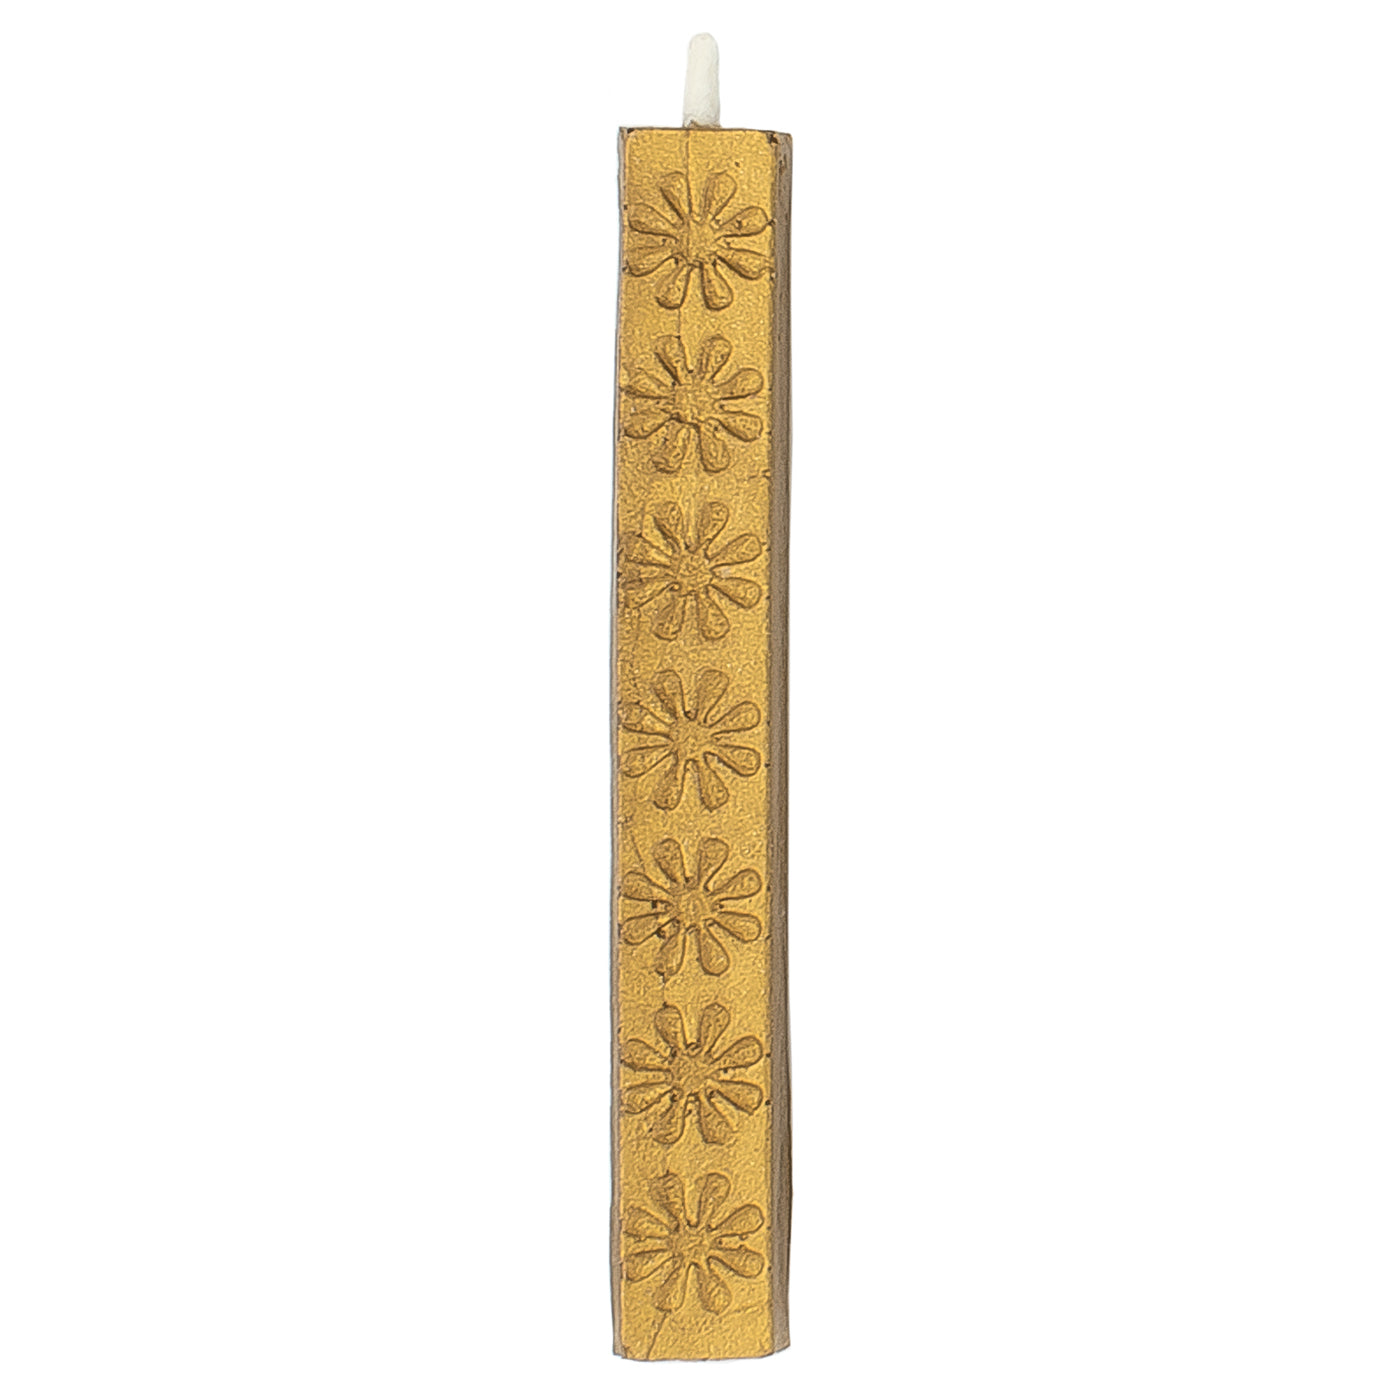 Global Solutions Wax Seal Stick - Gold